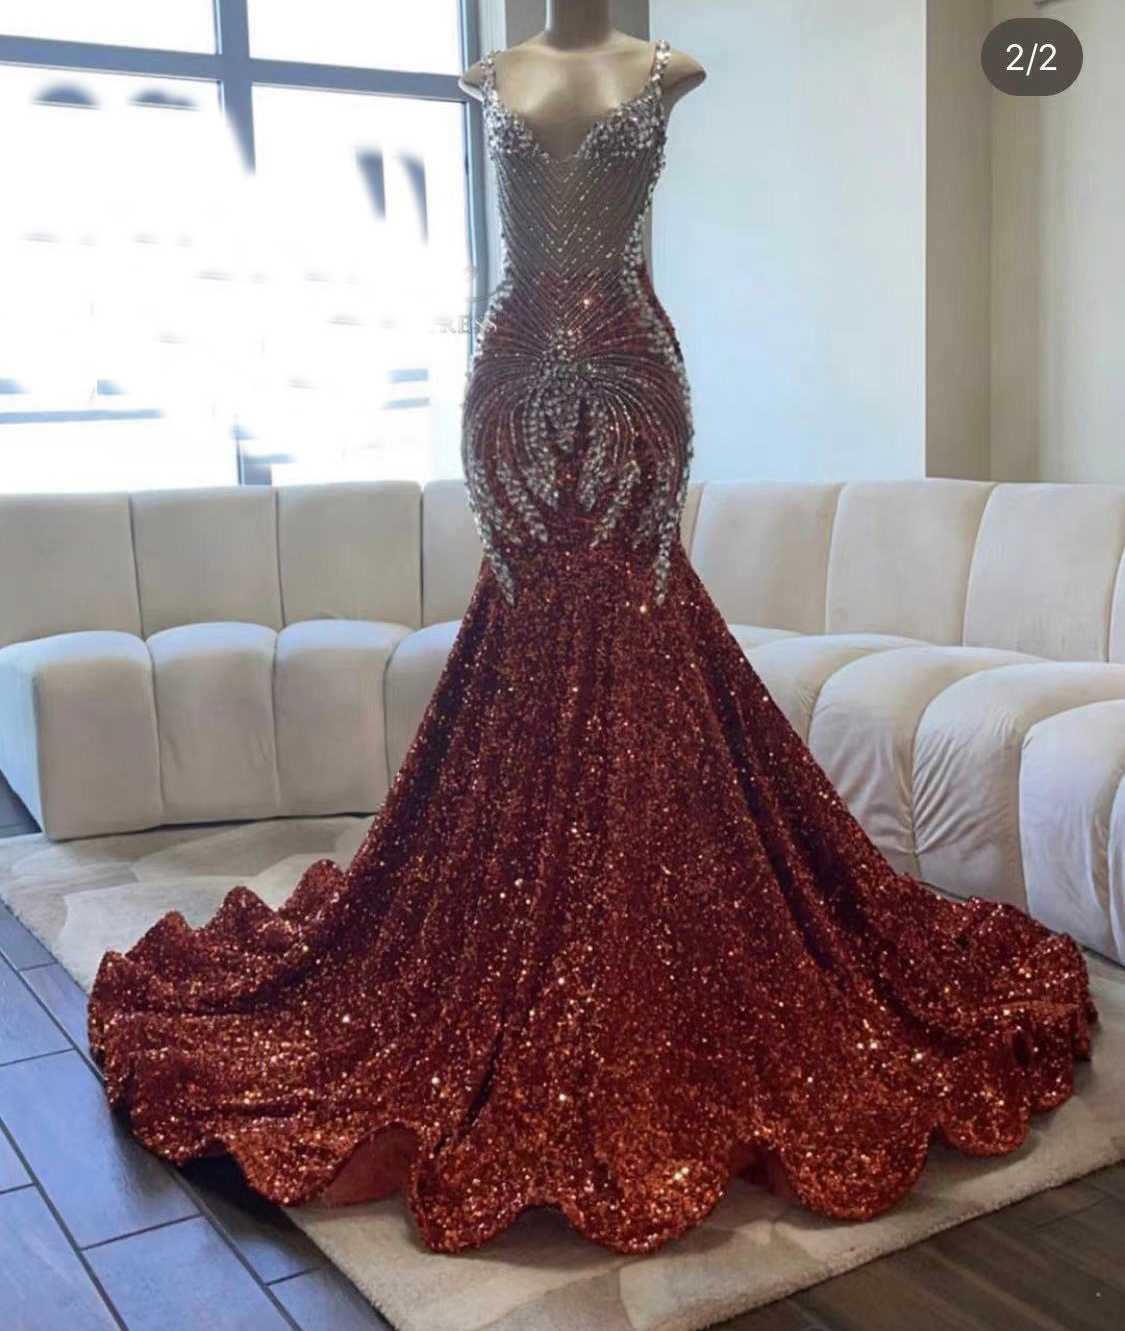 Red Prom Dresses, Red Evening Dress, Crystal Prom Dresses, Beaded Prom Dresses, Luxury Prom Dresses, High Quality Prom Dresses, Mermaid Prom